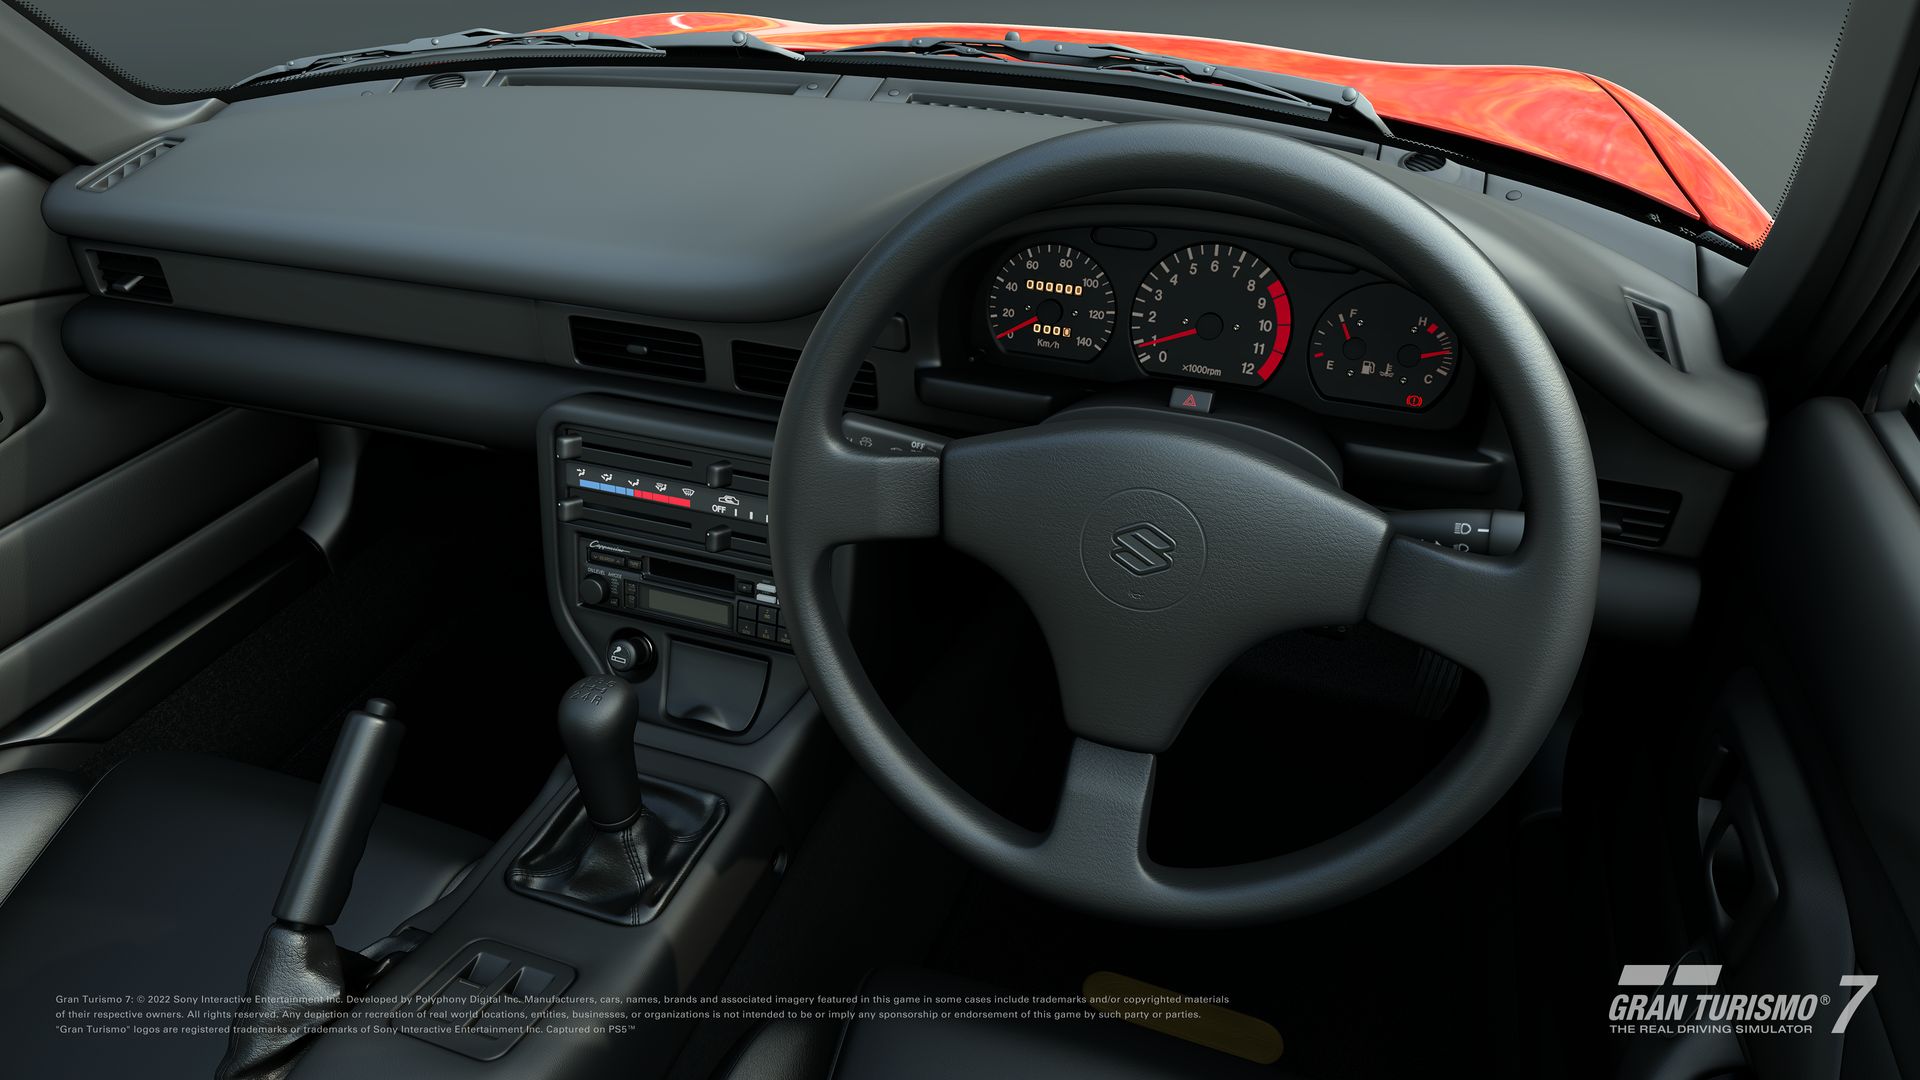 List of the Best Steering Wheels for Gran Turismo 7 - Operation Sports